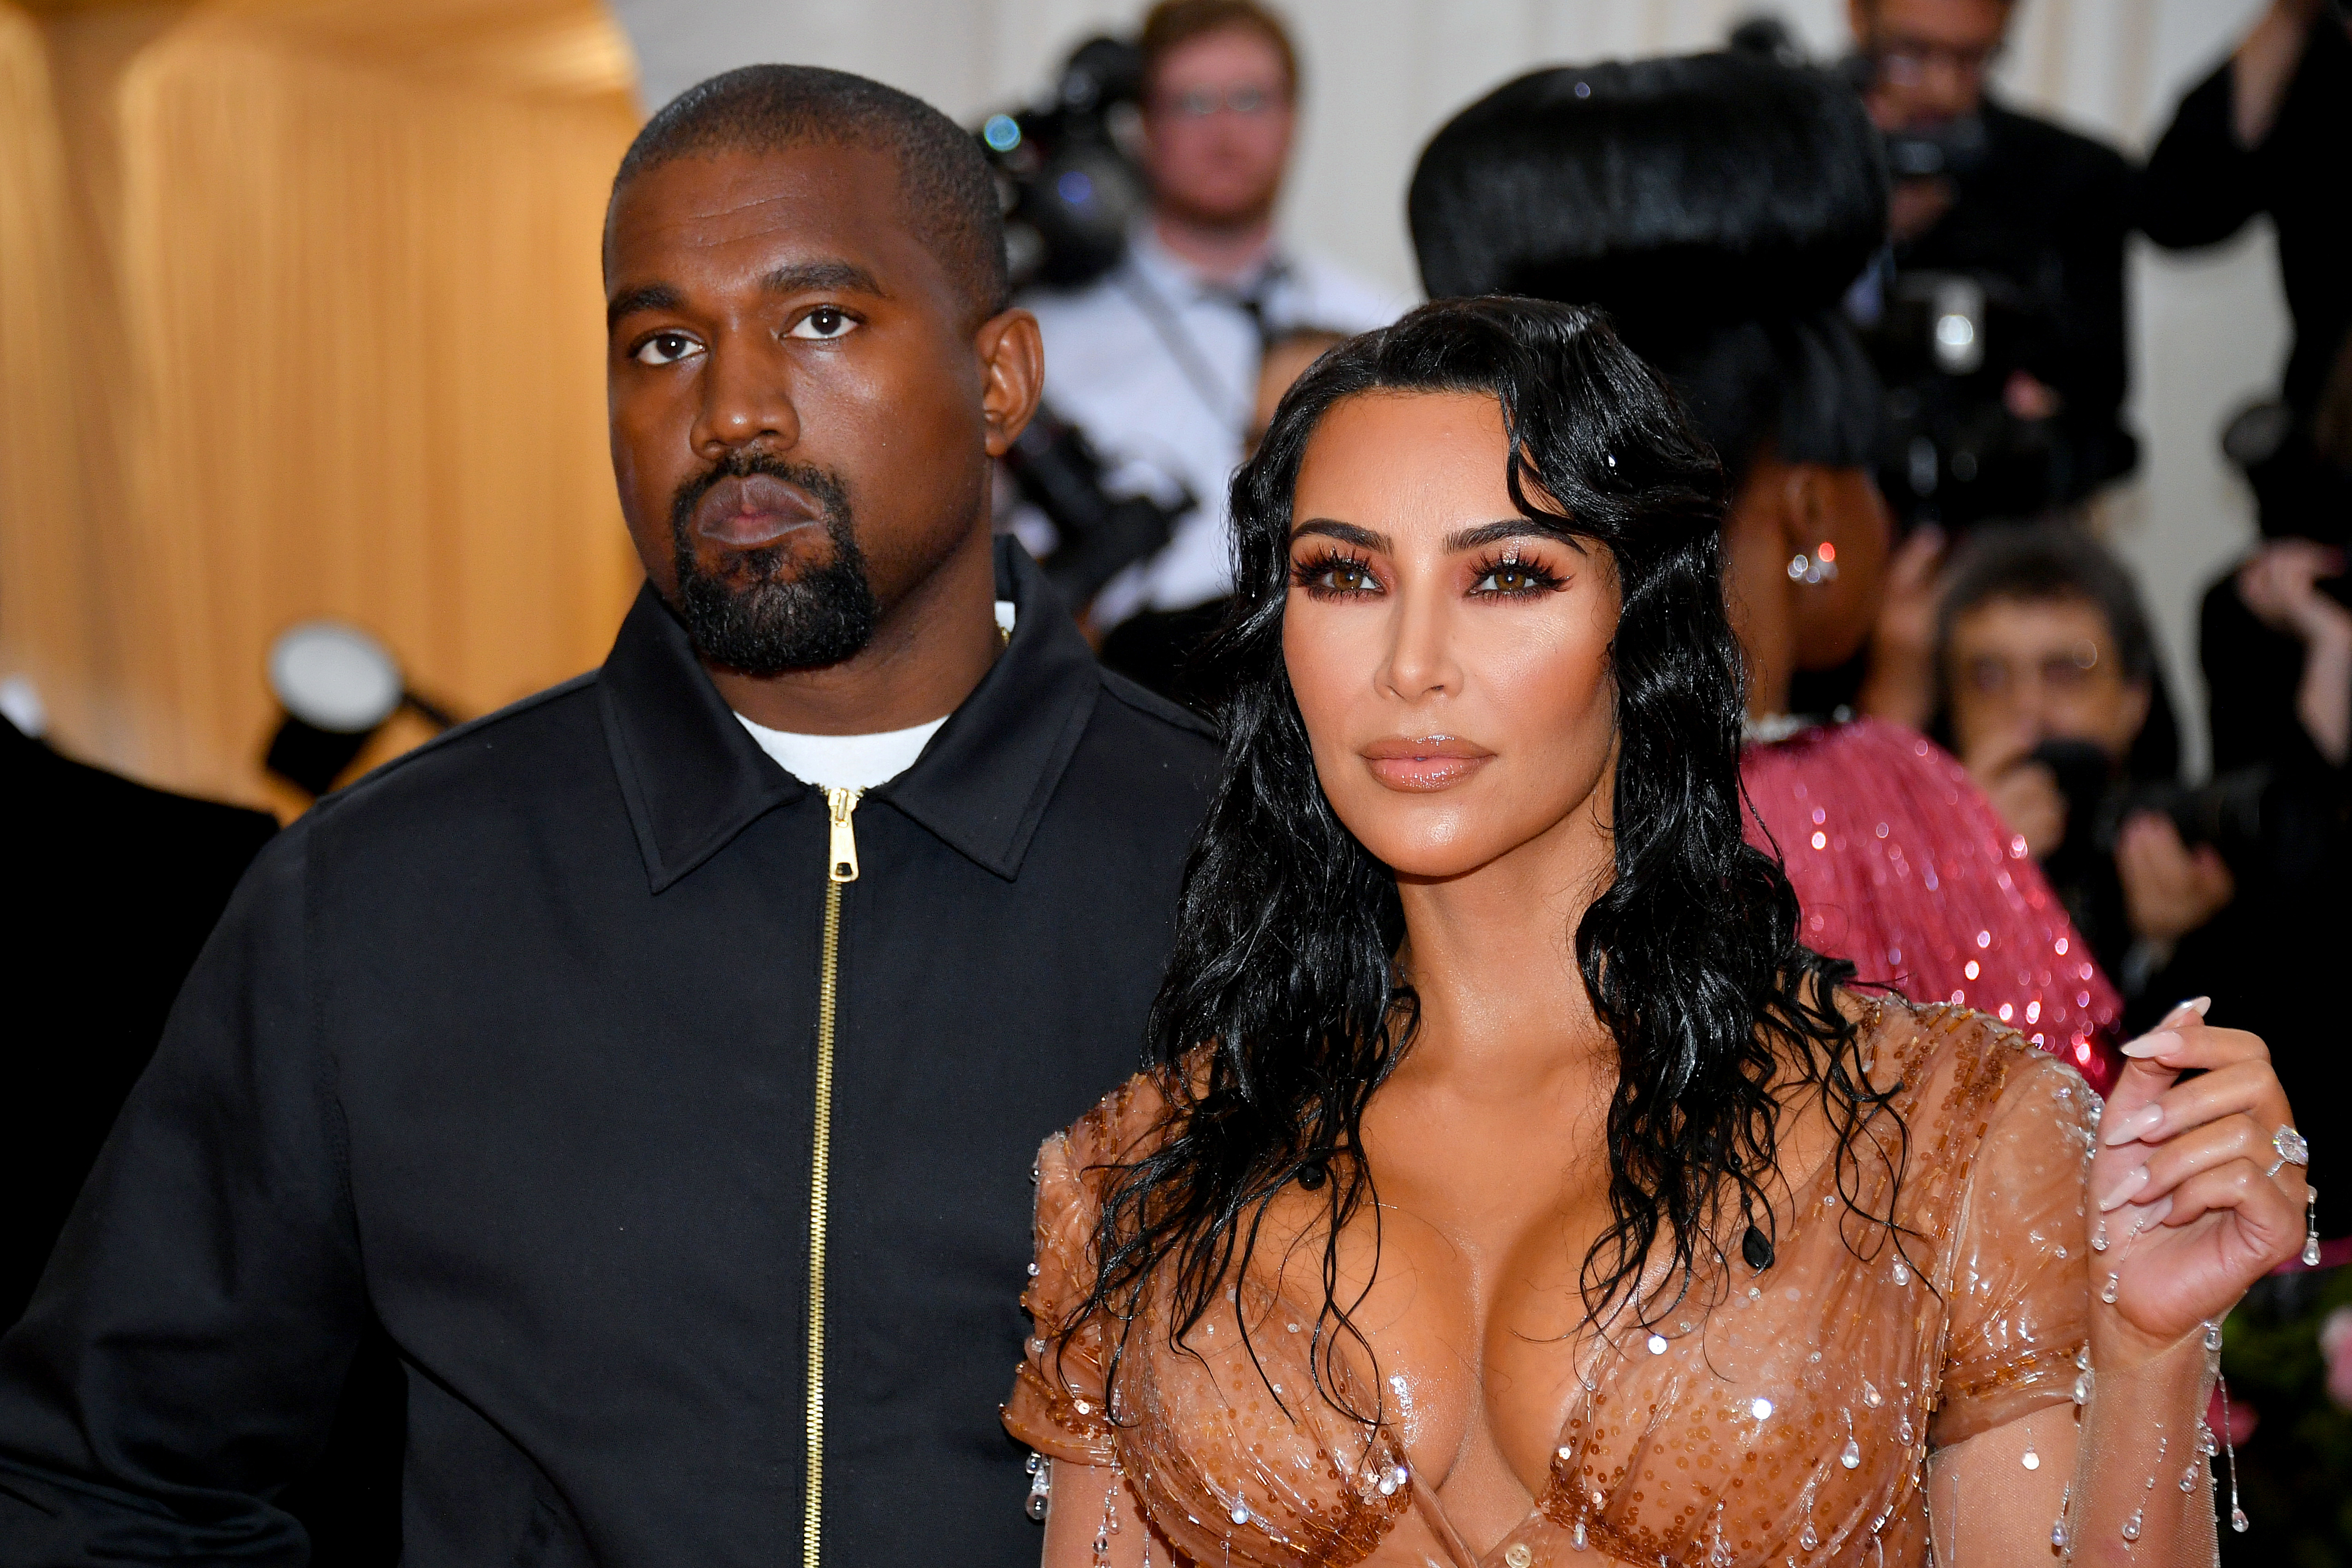 Close-up of Ye and Kim at a media event